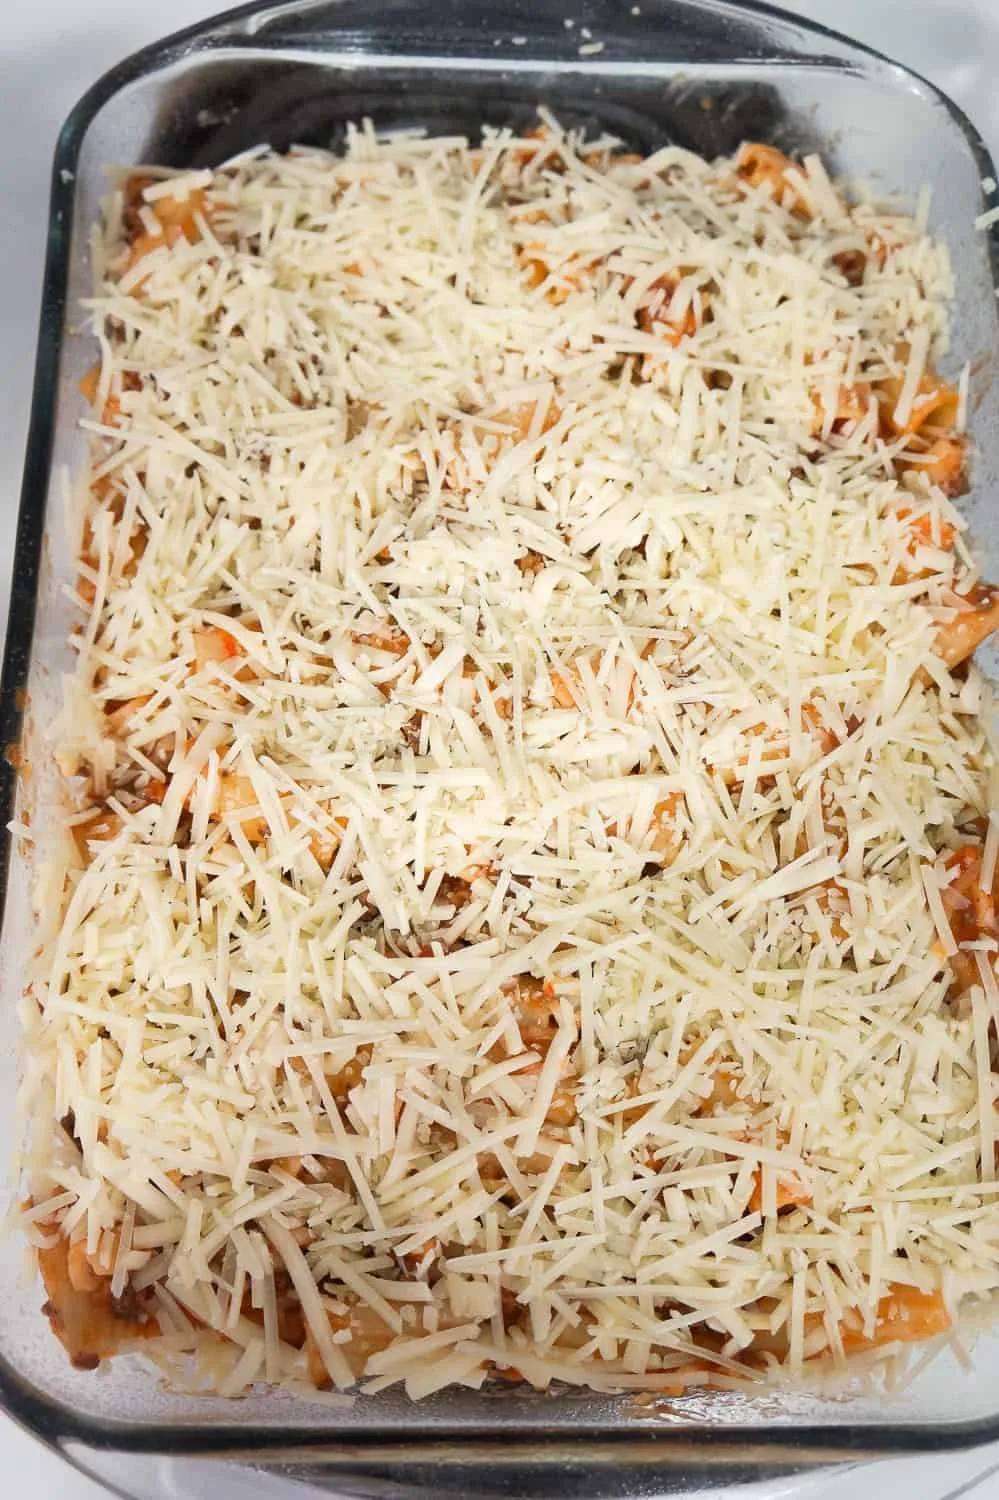 shredded mozzarella and Parmesan cheese on top of rigatoni before baking